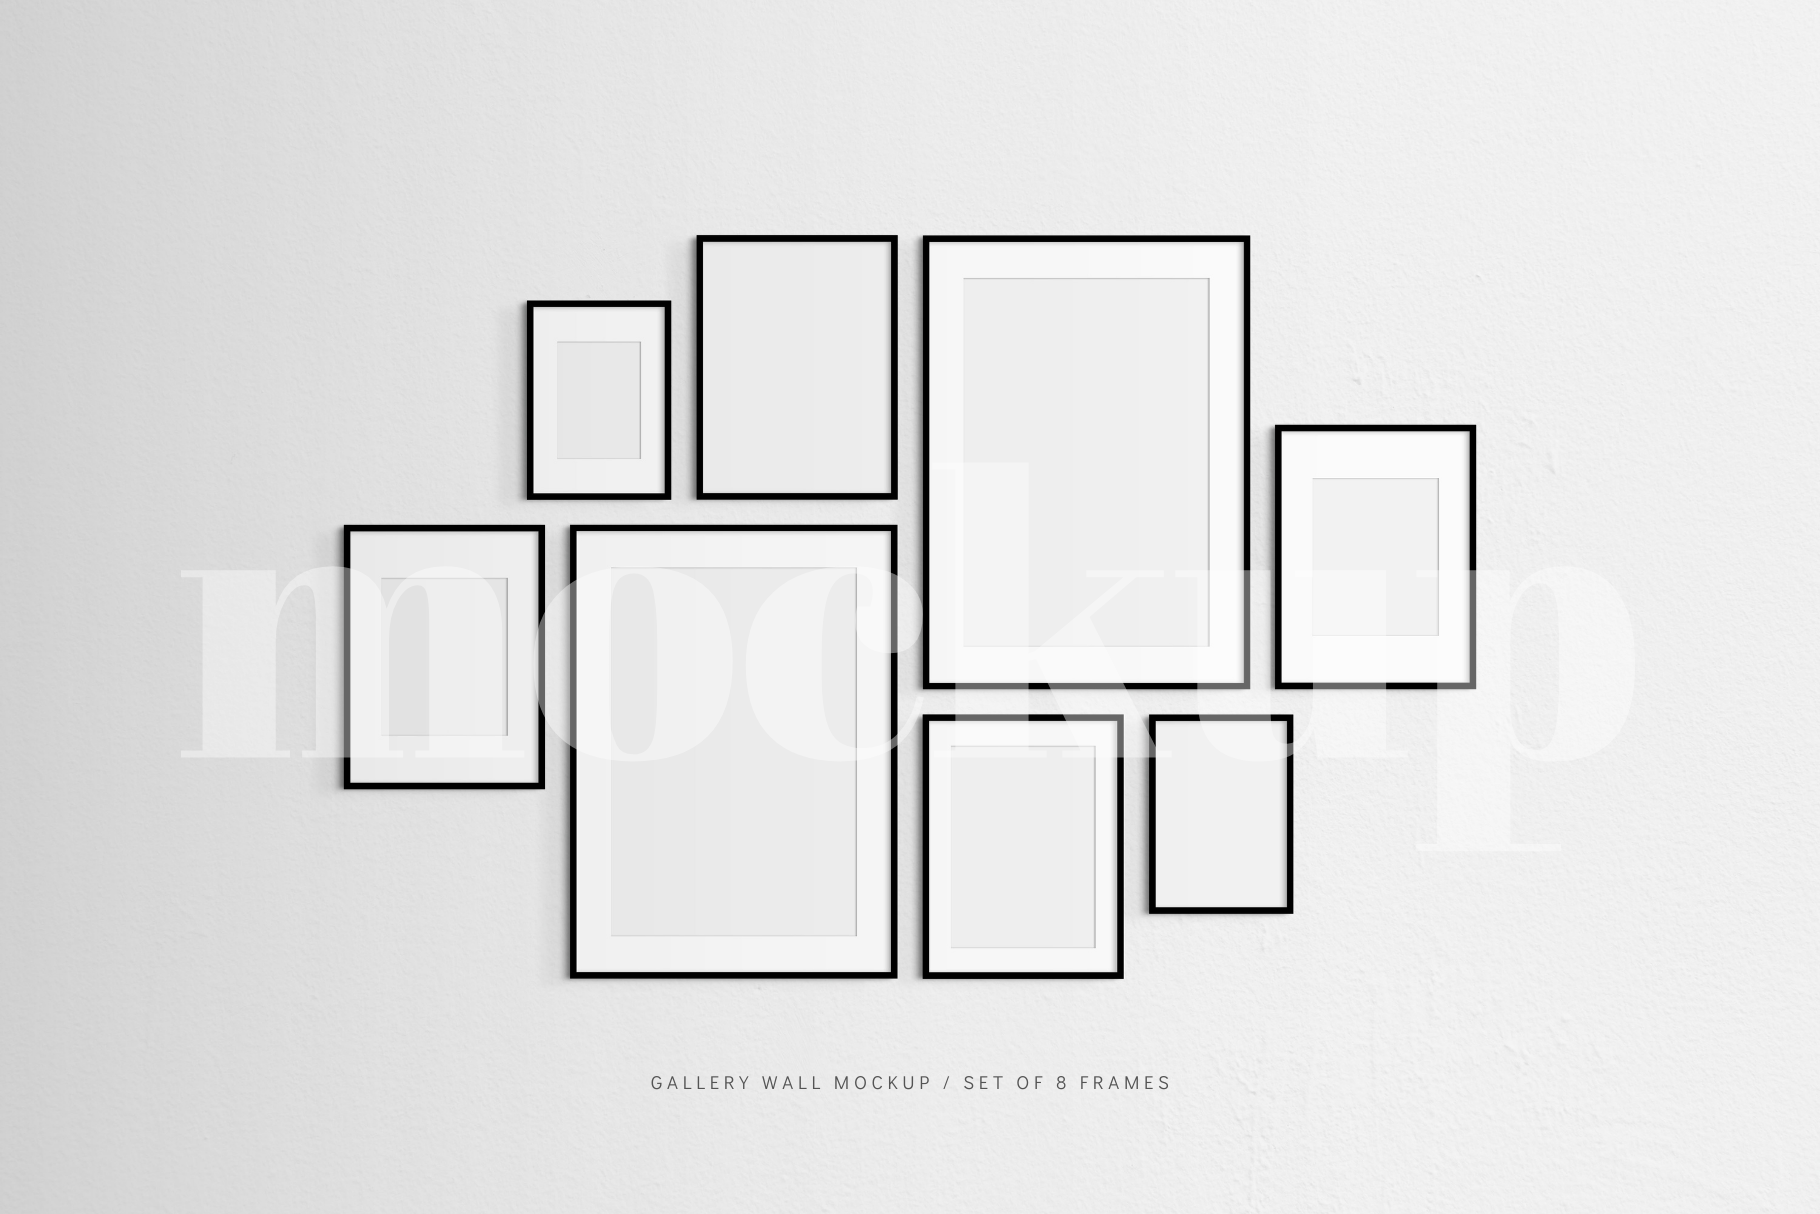 Gallery wall mockup that features a set of 8 thin black frames.